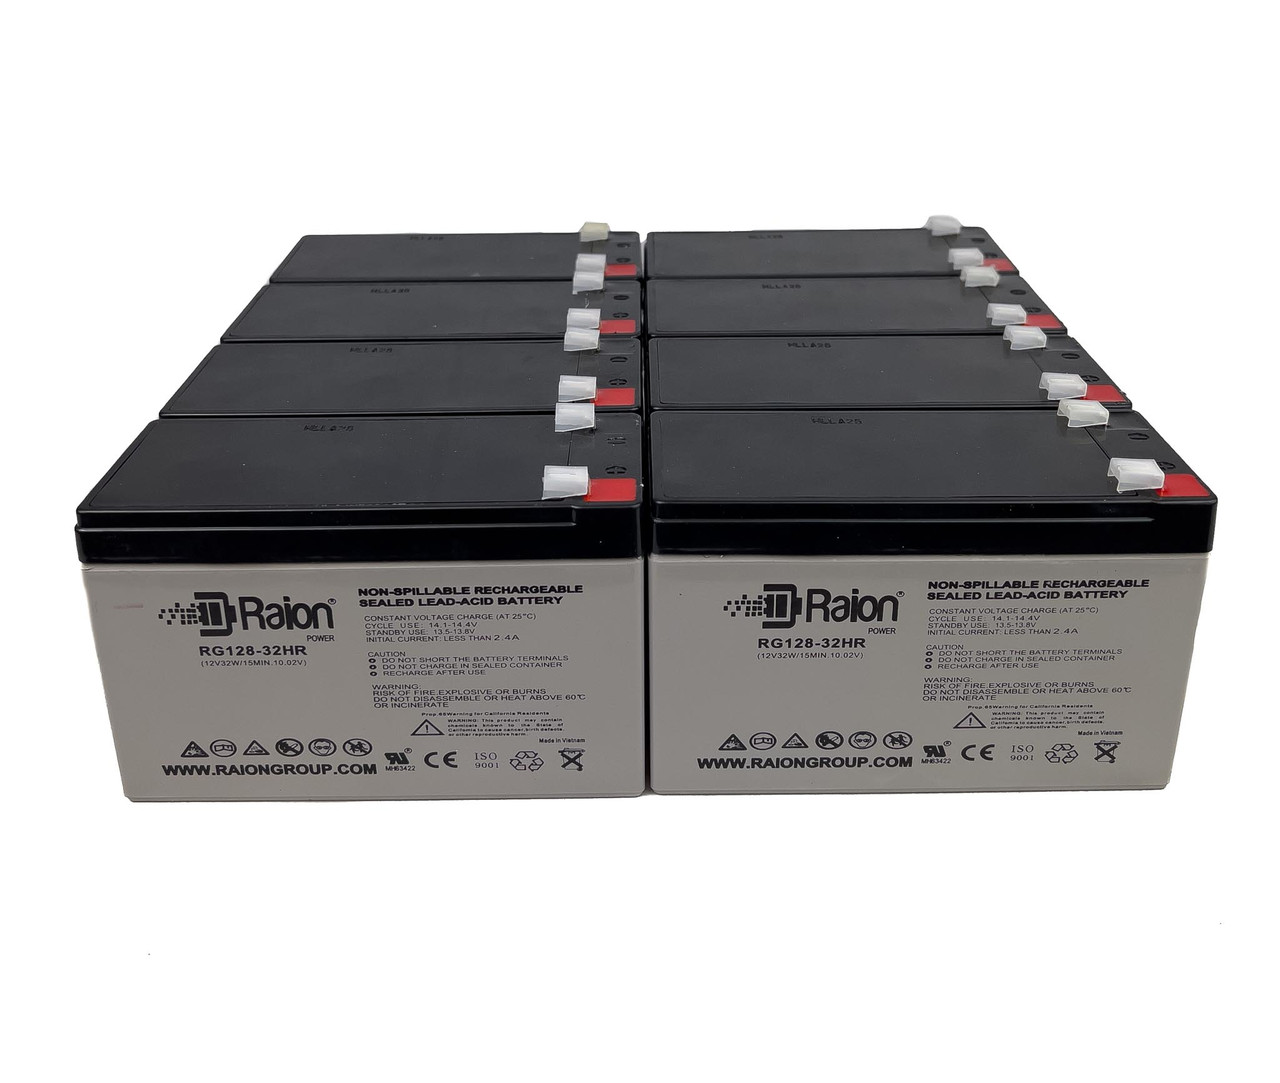 Raion Power 12V 7.5Ah High Rate Discharge UPS Batteries for Minuteman MCP 3000iRM E - 8 Pack